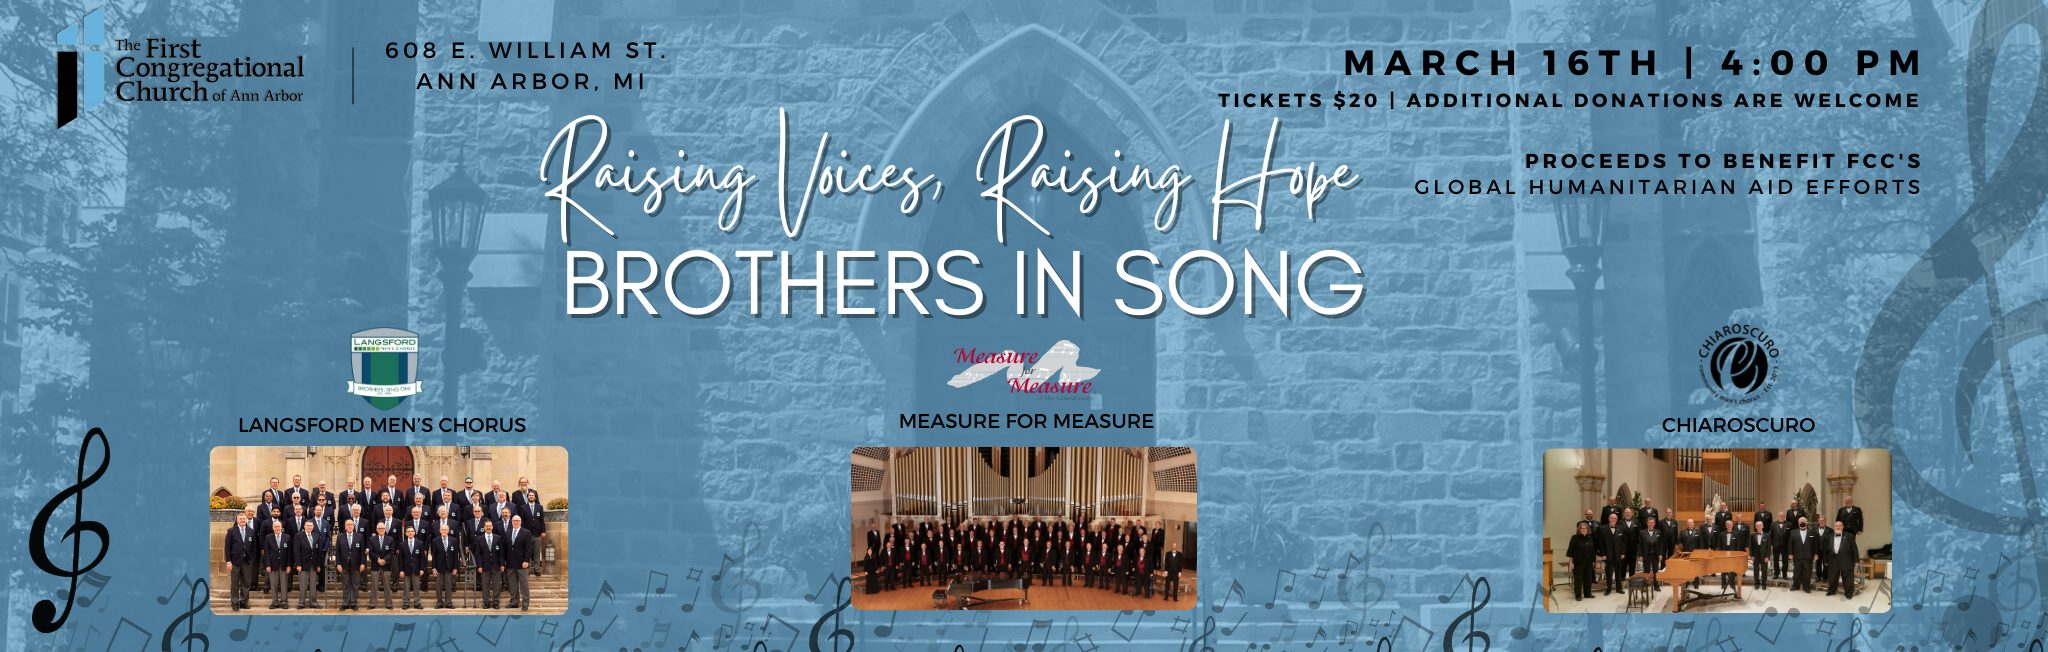 Raising Voices, Raising Hope – Brothers in Song